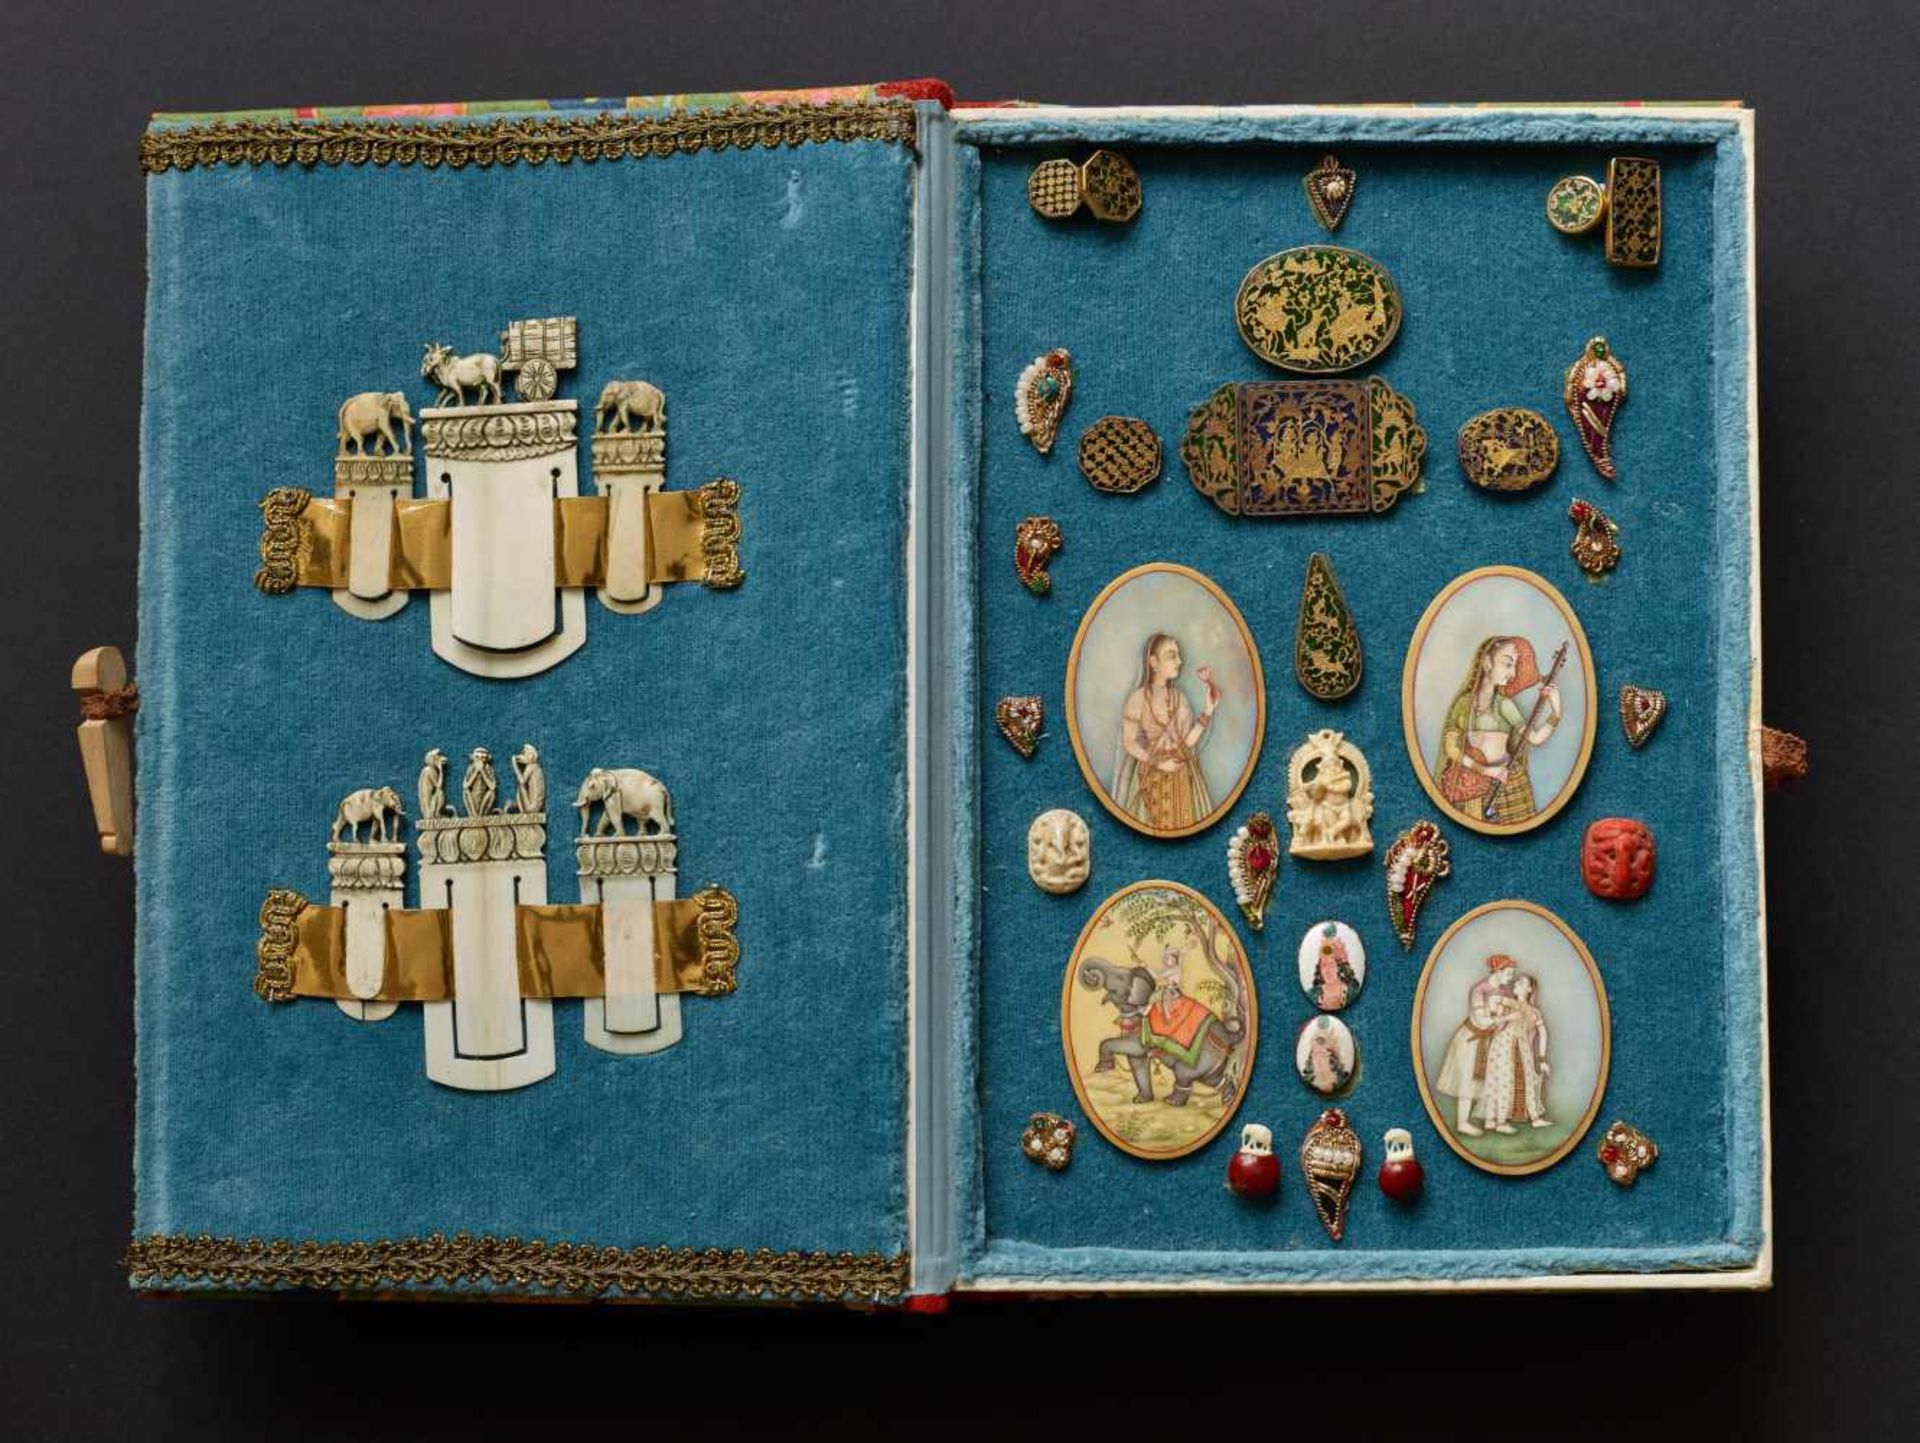 A COLLECTION OF MINIATURE COLLECTIBLES IN CASEIvory, gold, painting, enamel, pearls, etc.Mostly